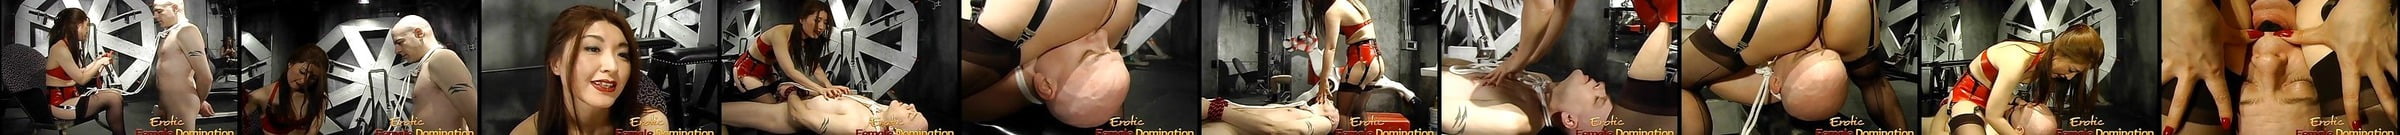 Japanese Mistress Trains Her Slave With A Whip Porn Ad